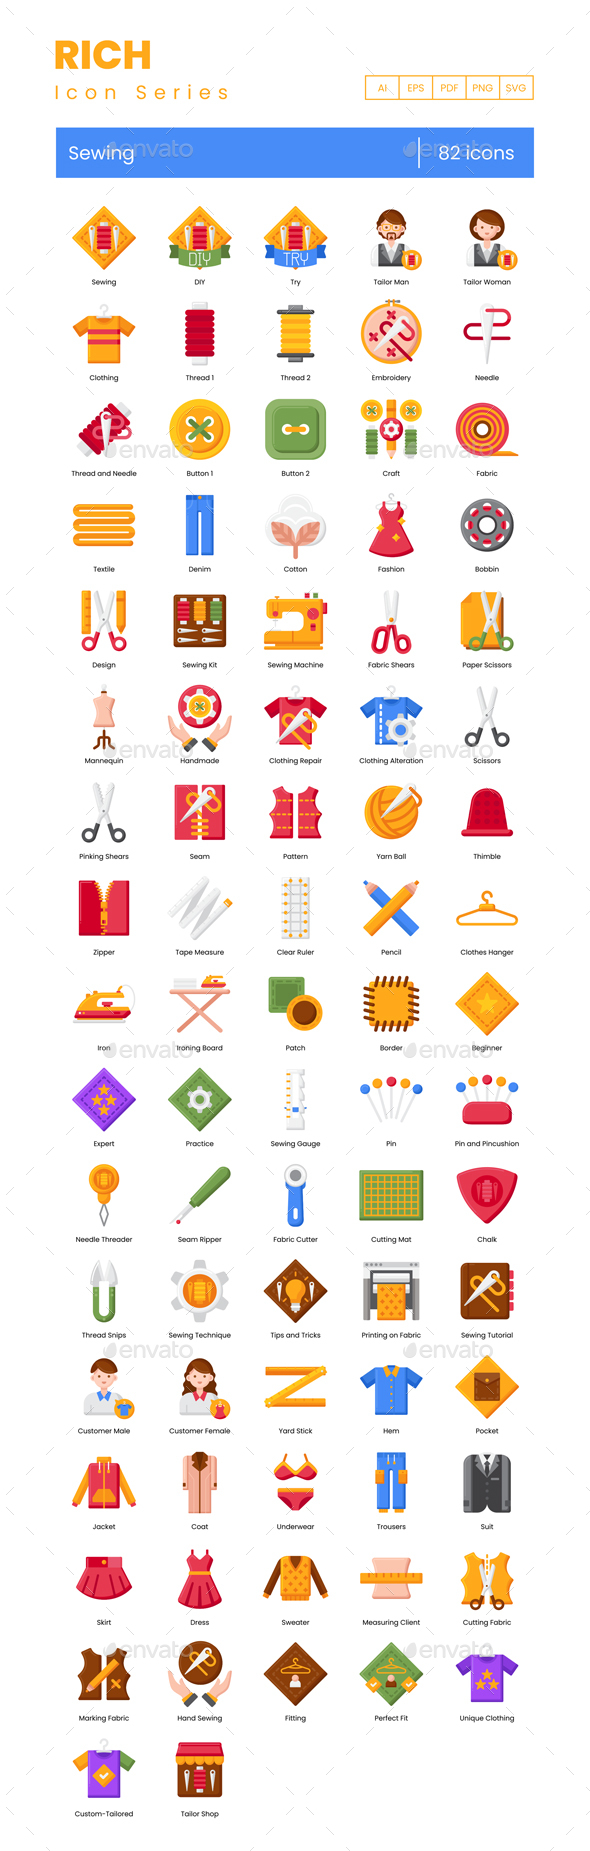 [DOWNLOAD]82 Sewing Icons Icons | Rich Series